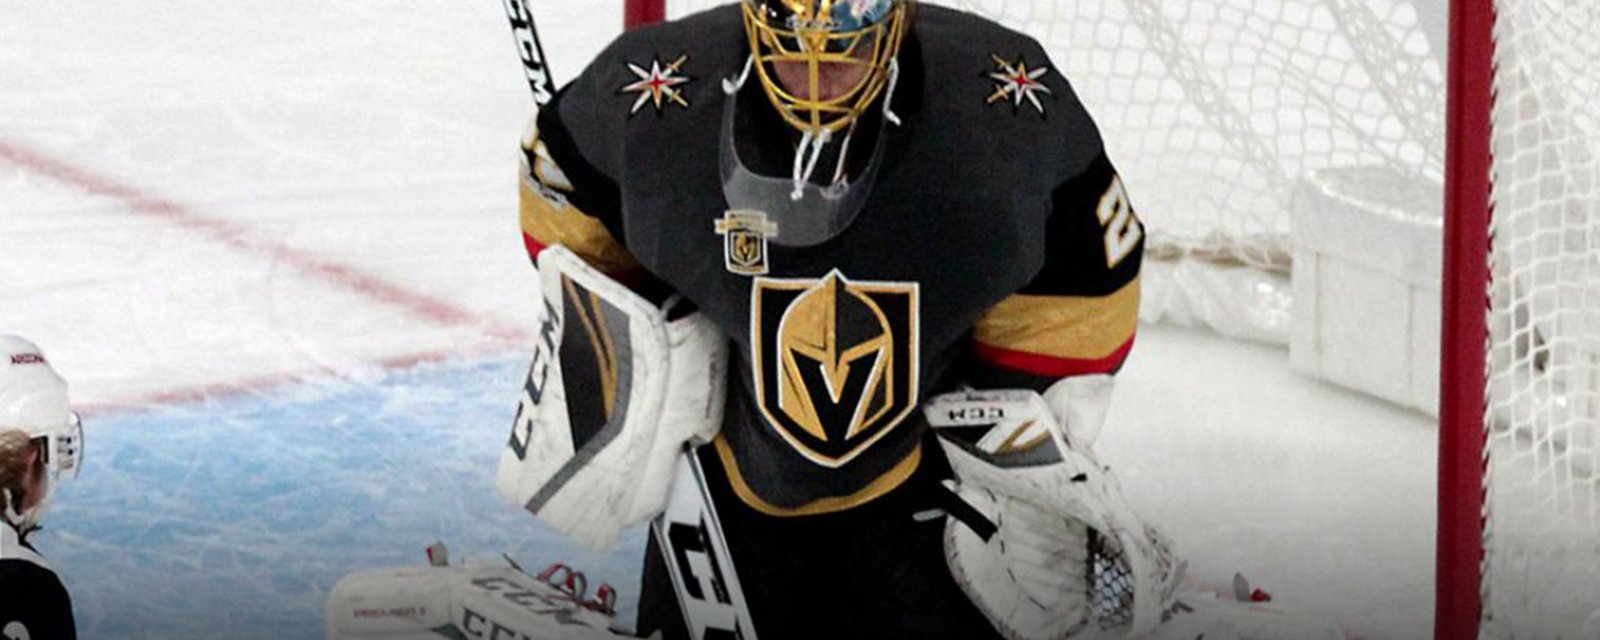 Marc-Andre Fleury passed an NHL legend on Sunday!